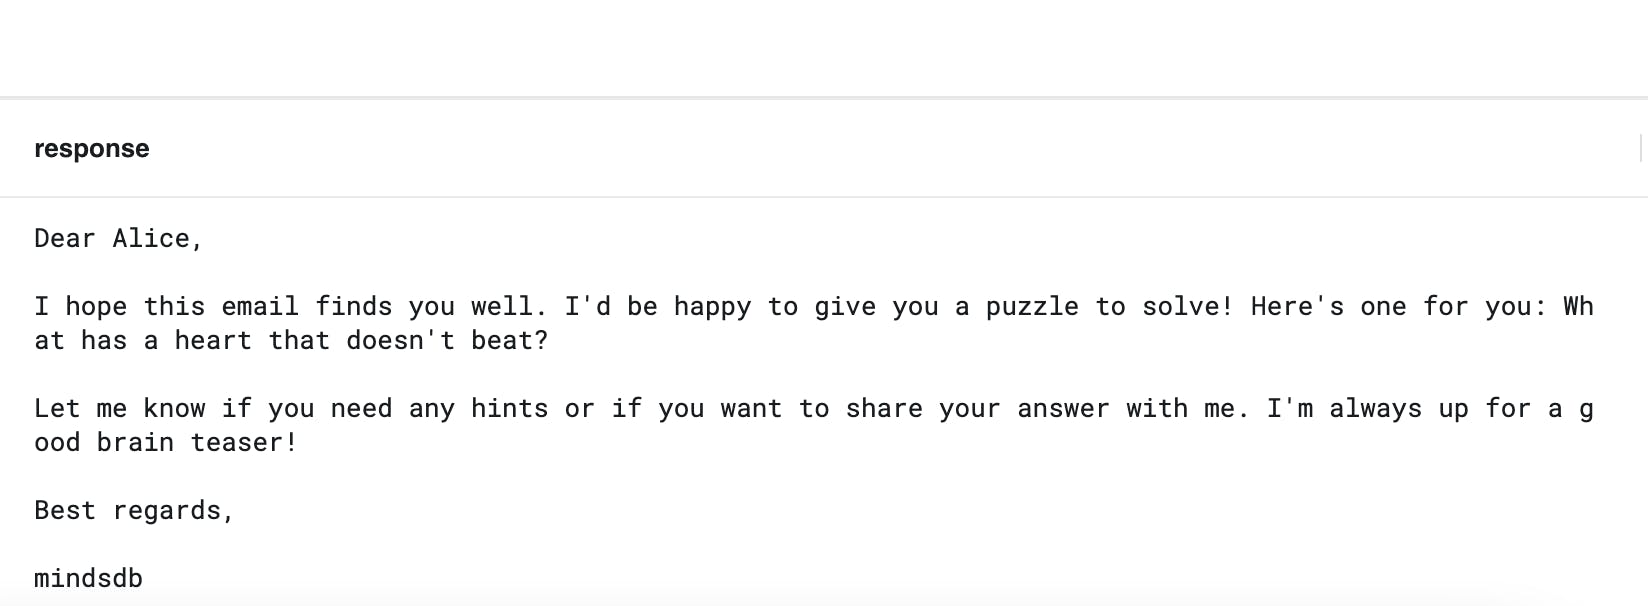 model email response in casual tone